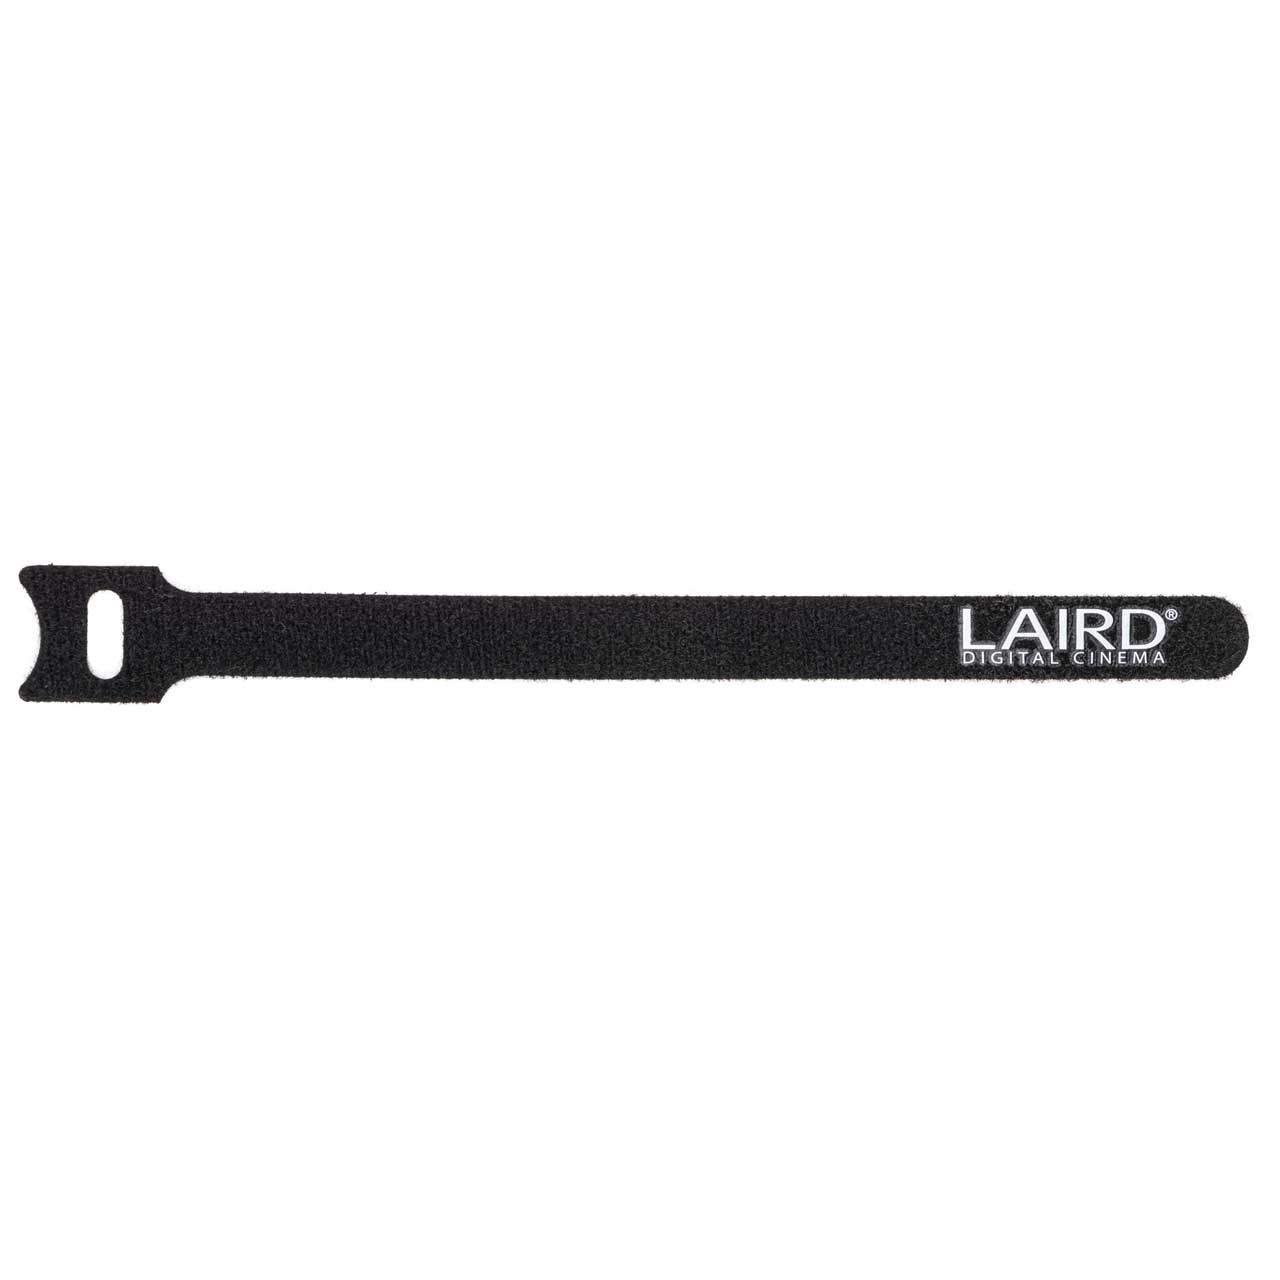 Laird Hook and Loop Cable Wrap 12mm x 180mm Black with White Logo - 1000 Pack LDC-HKNLP-1000PK